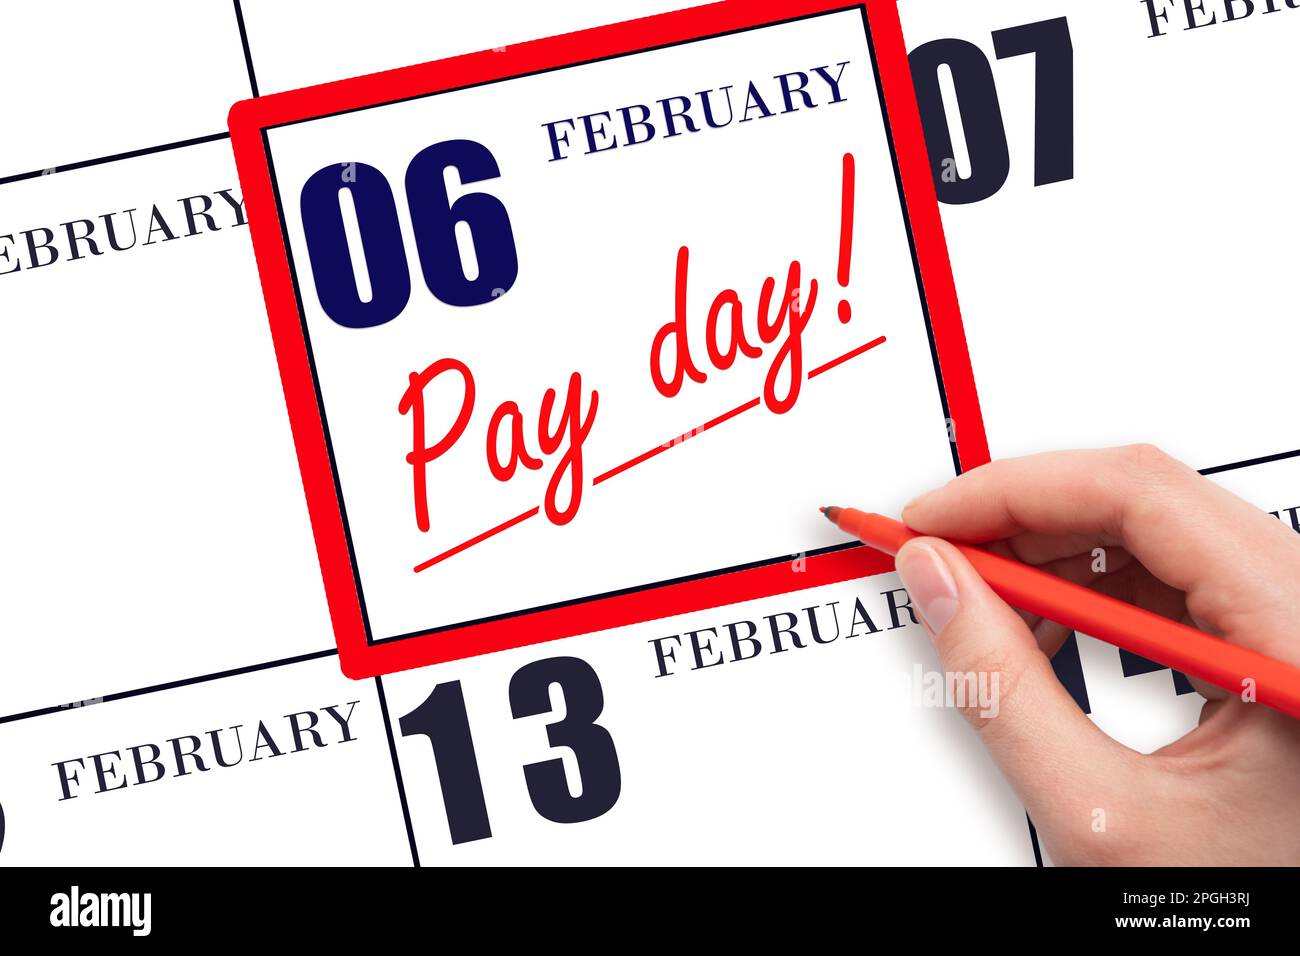 6th day of February. Hand writing text PAY DATE on calendar date February 6 and underline it. Payment due date. Reminder concept of payment. Winter mo Stock Photo